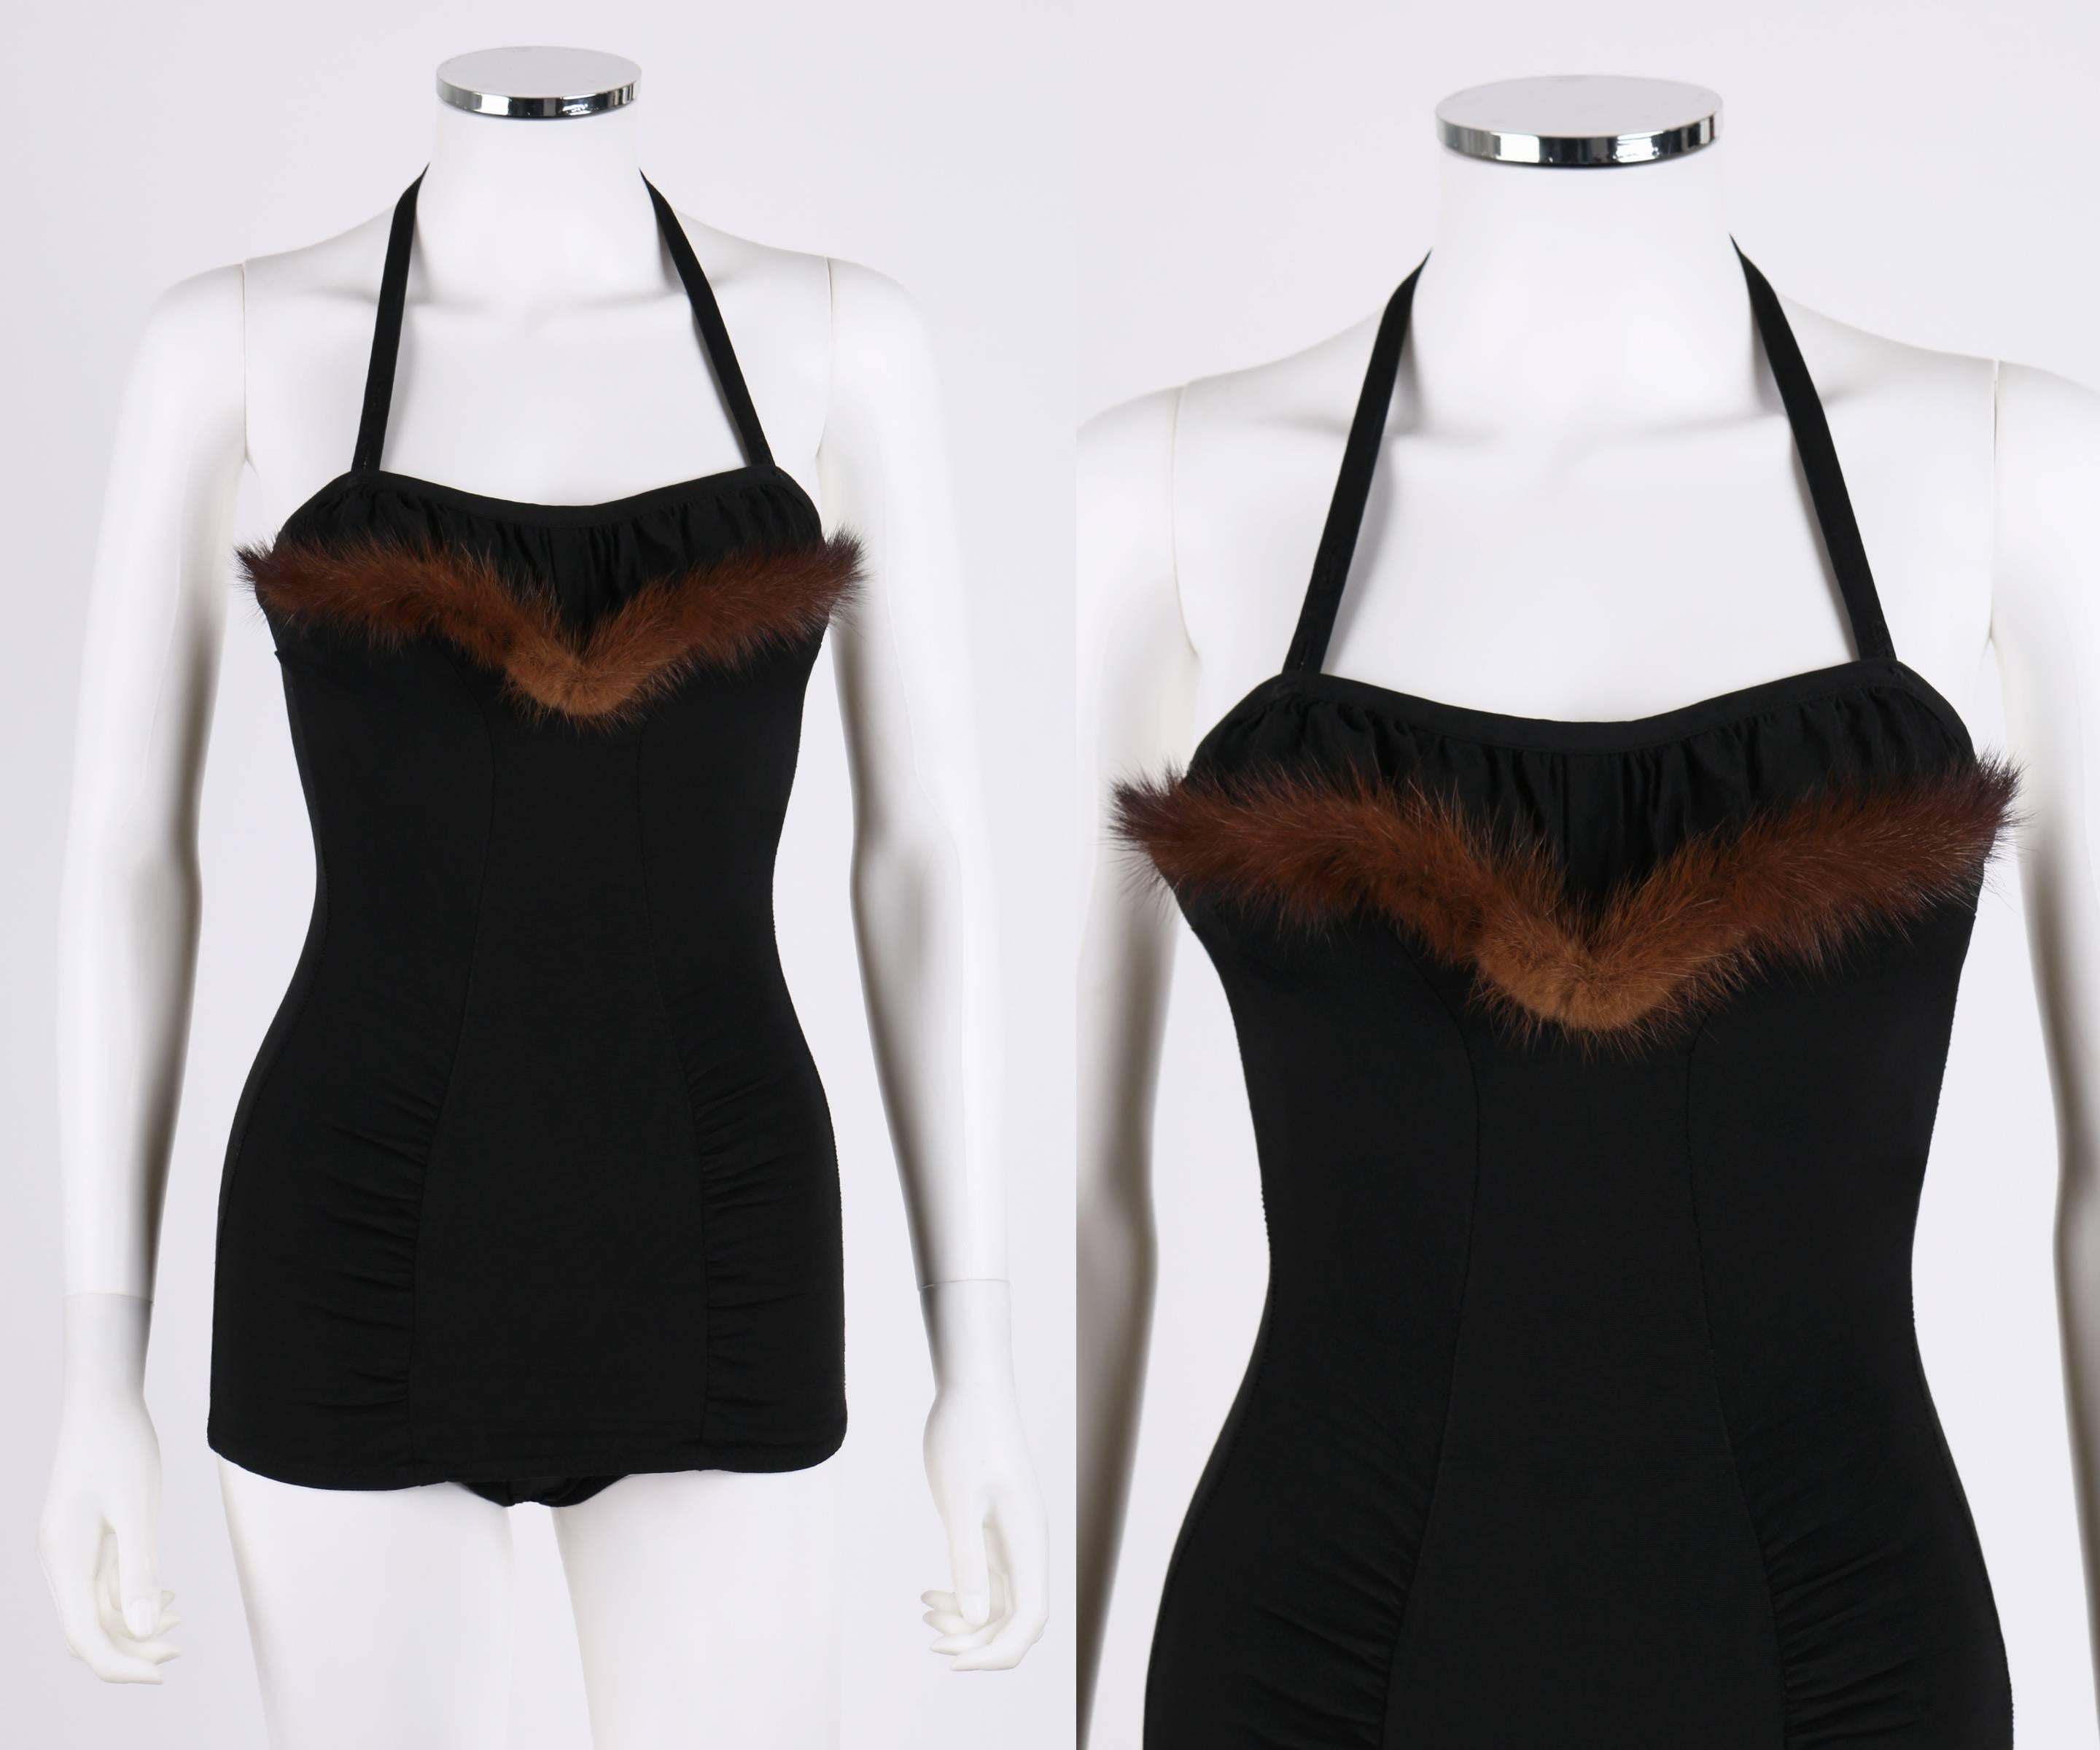 Vintage c.1950's PinUp black one piece bathing suit. Thin adjustable halter strap with two button closures. Ruched sweetheart neckline with mink fur trim. Ruching at side front near hips. Metal zipper closure in back with single loop and button